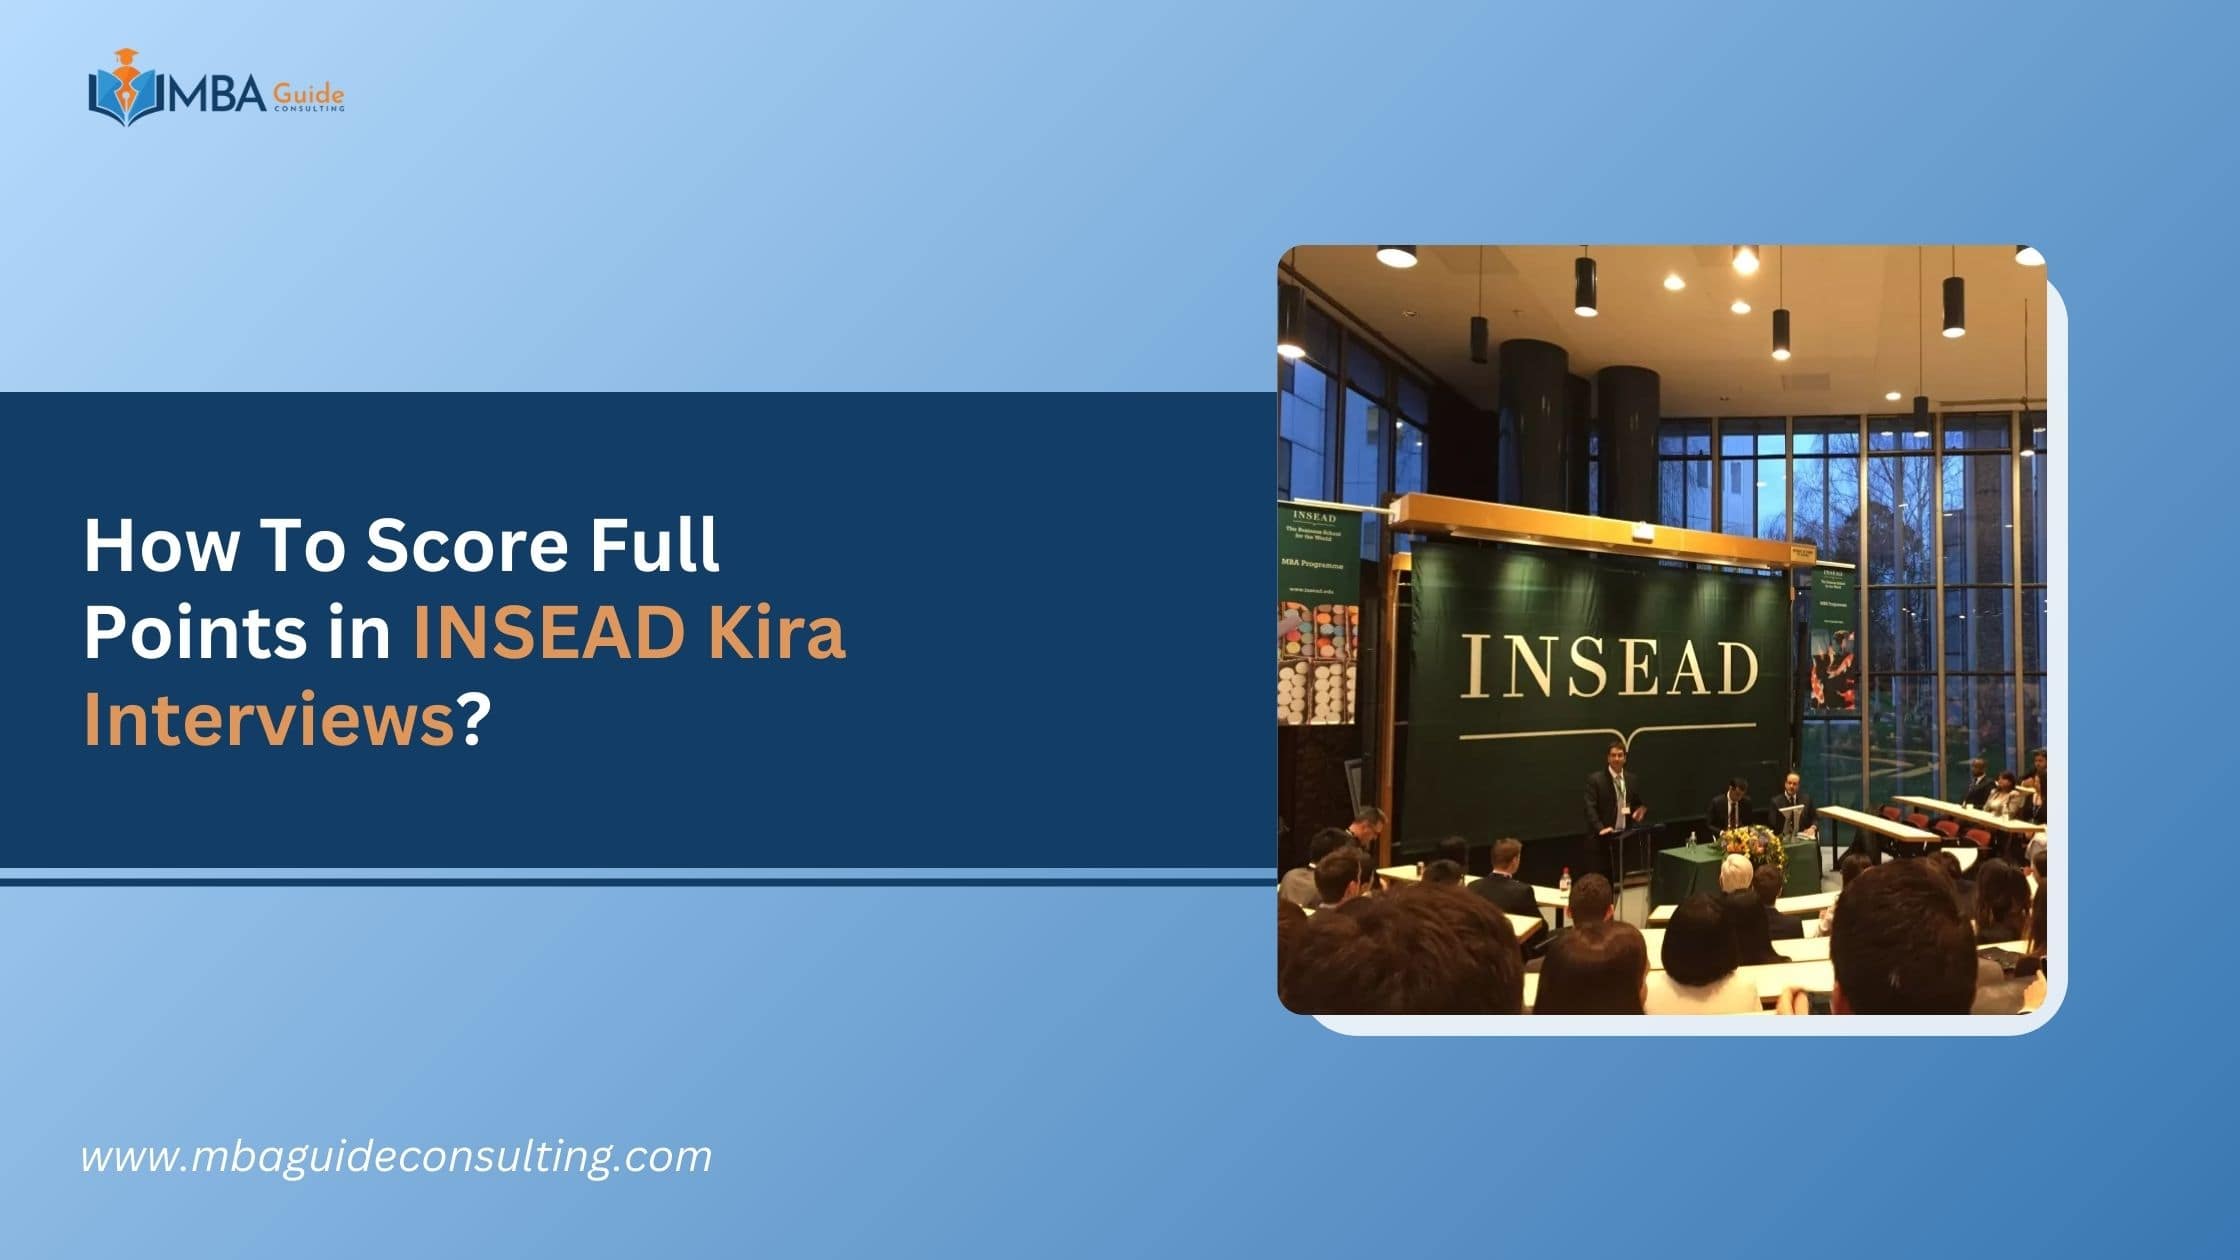 How To Score Full Points on Video Essay Questions in INSEAD Kira Interviews?